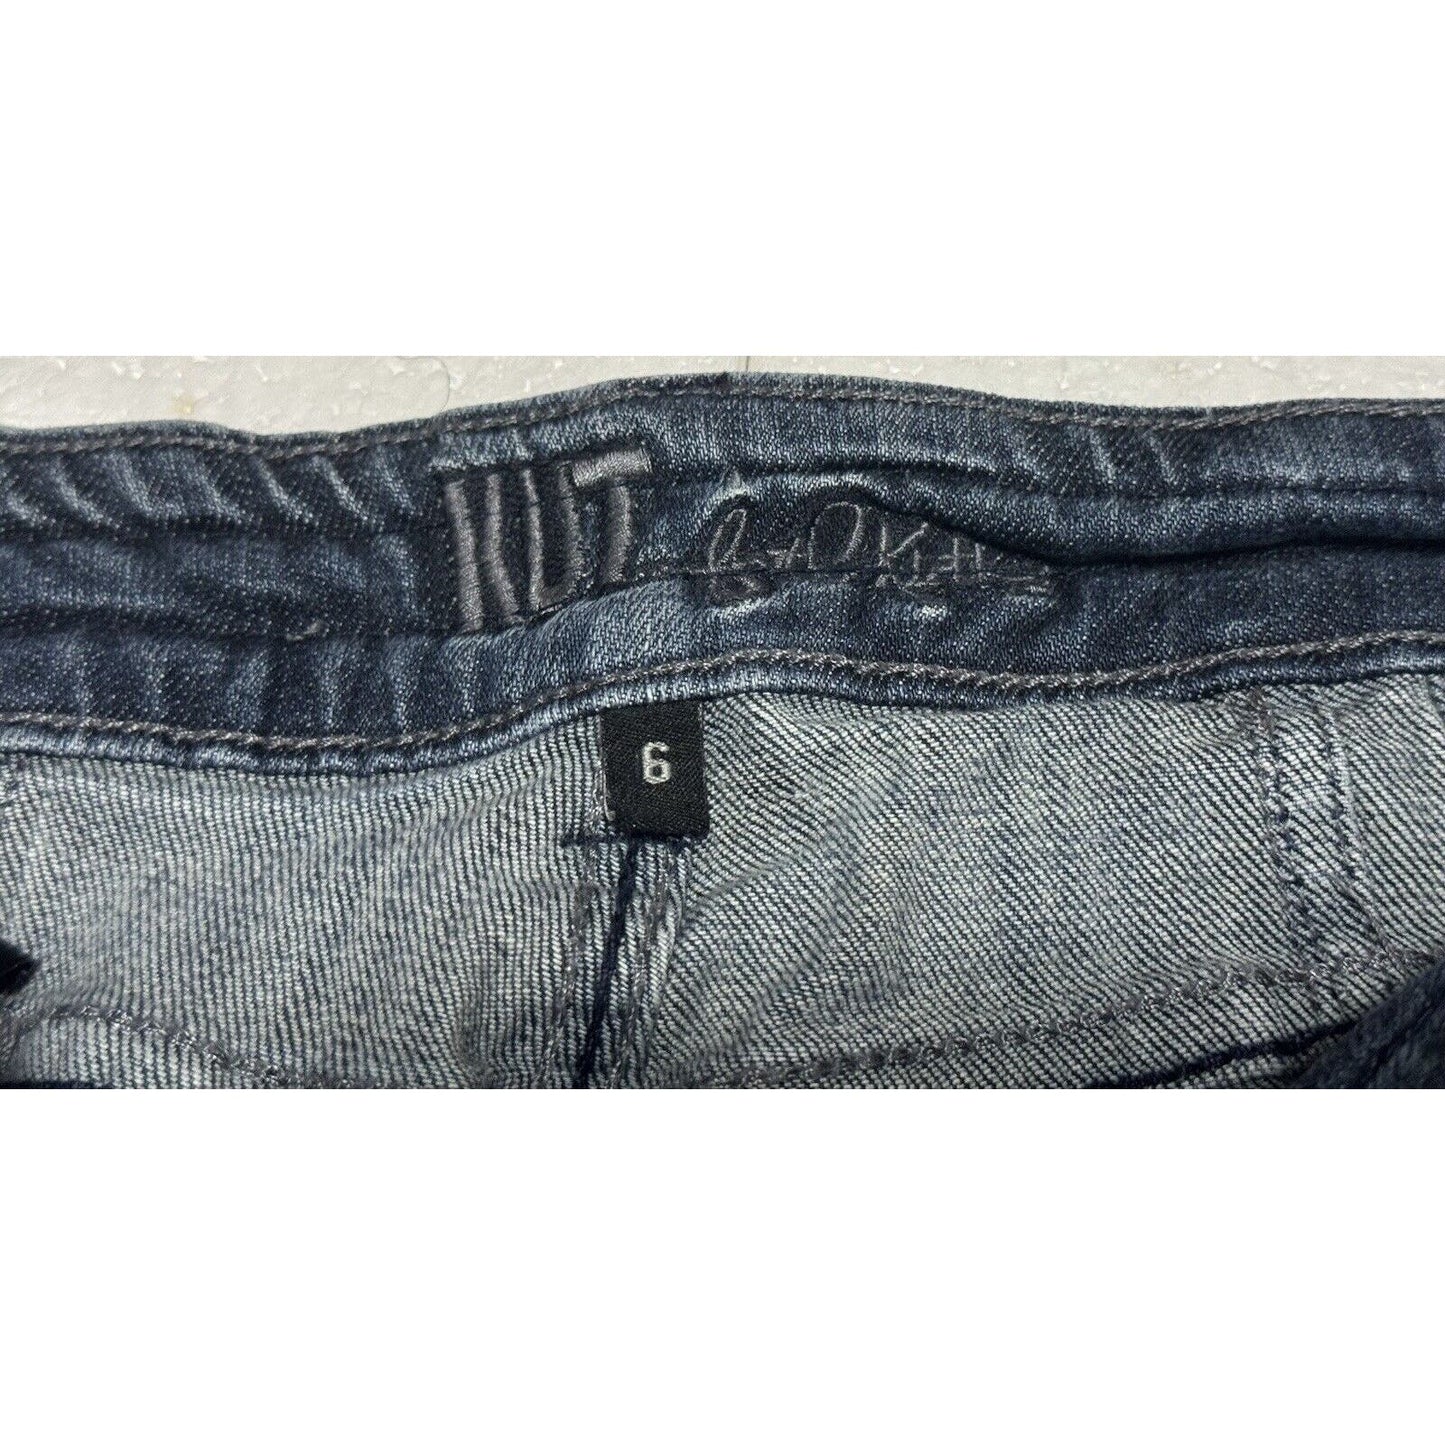 Kut From The Kloth Medium Wash Mid Rise Boot Cut Jeans Size 6 KP598MA1